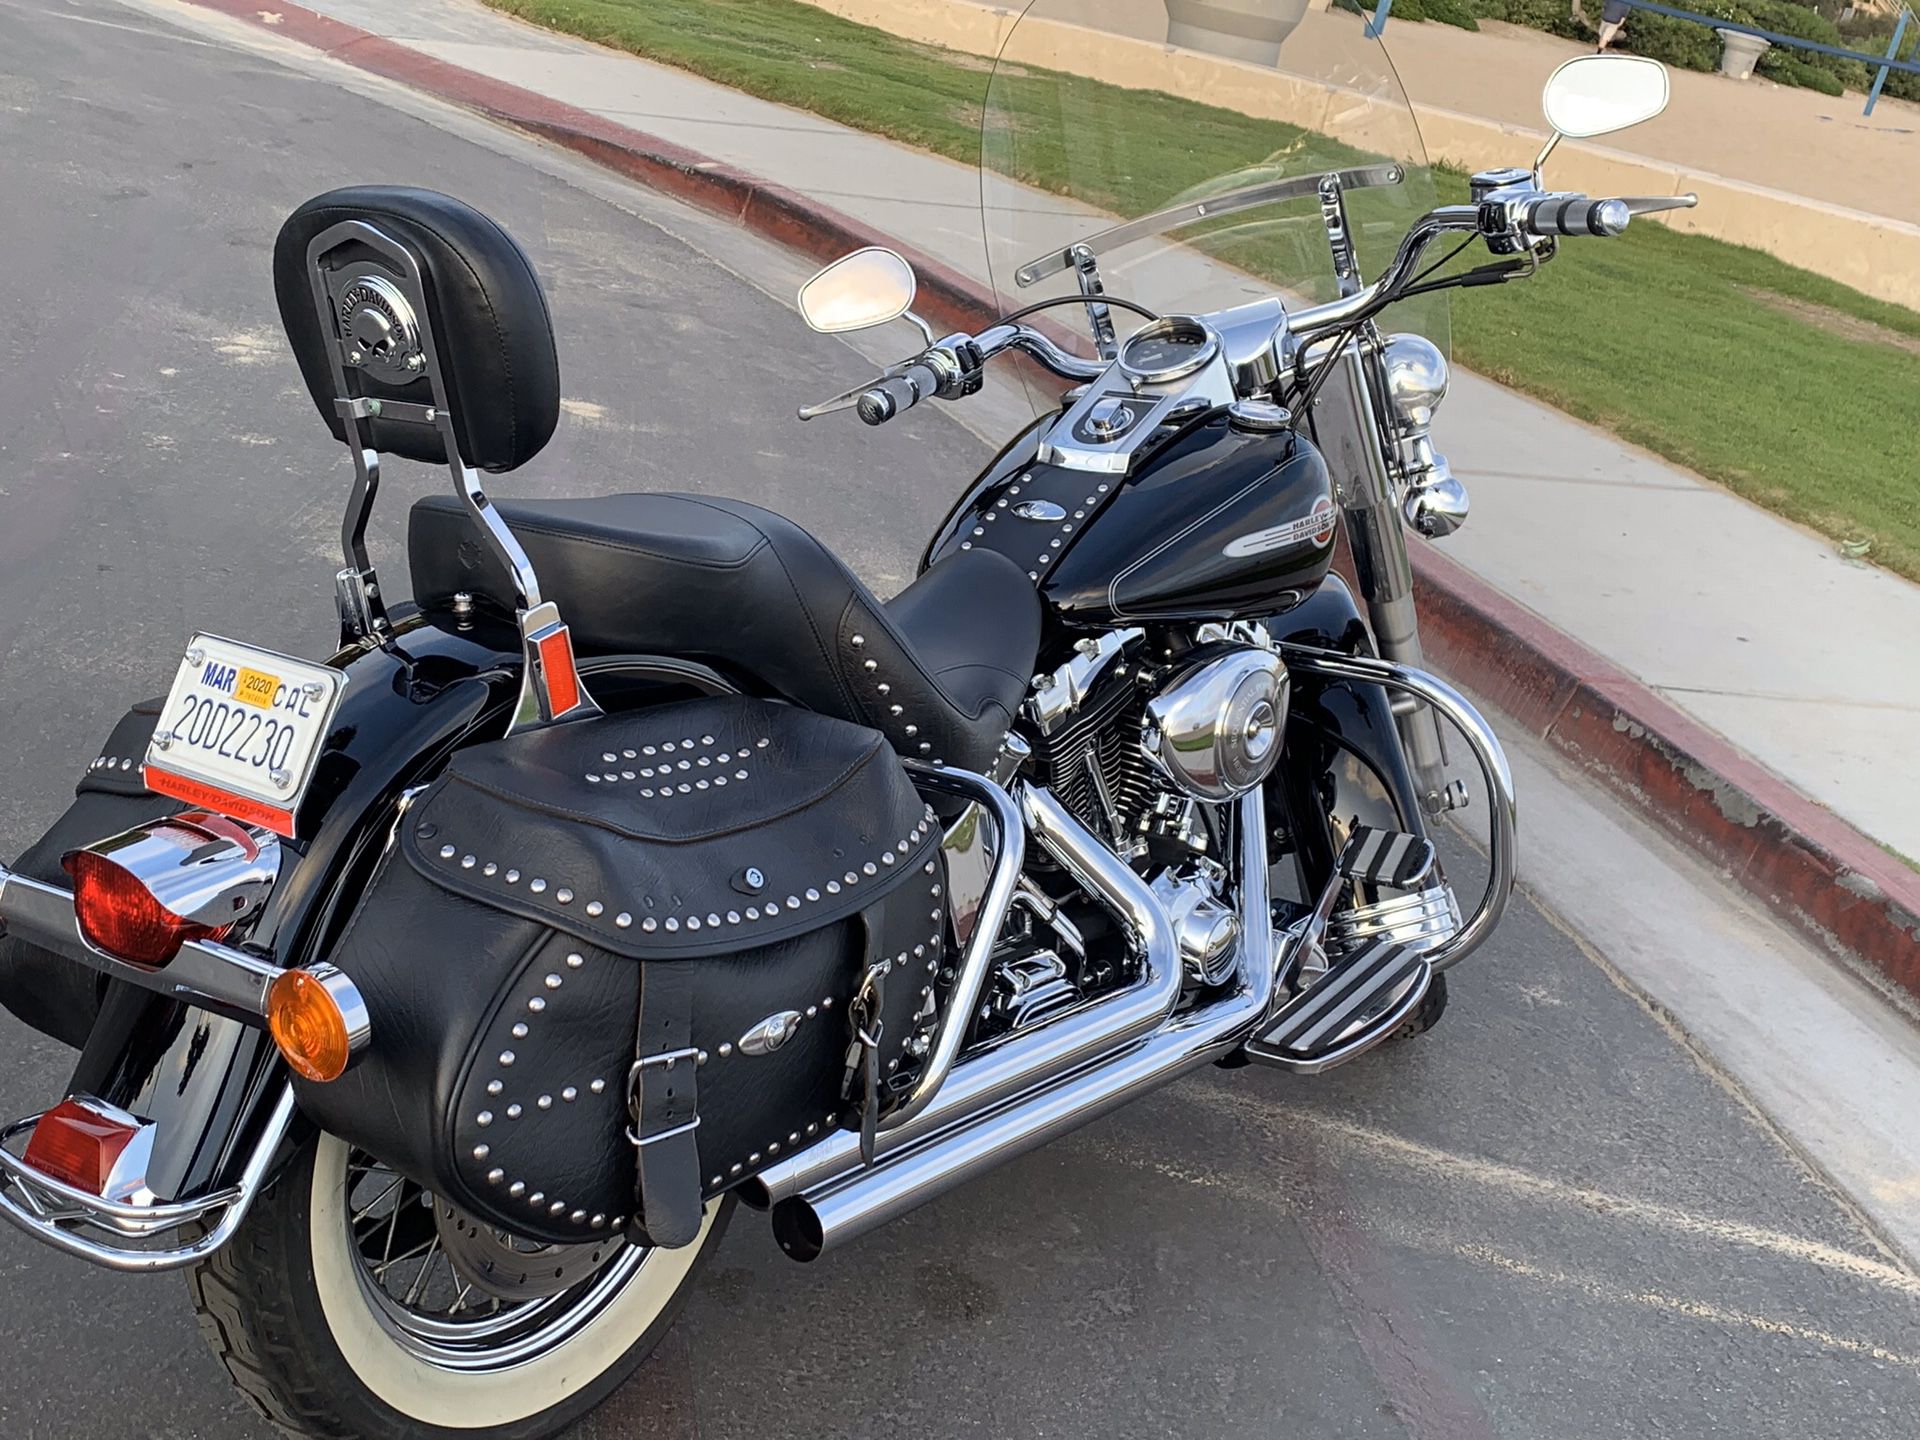 2004Harley-Davidson Heritage Softail classic . payments available.